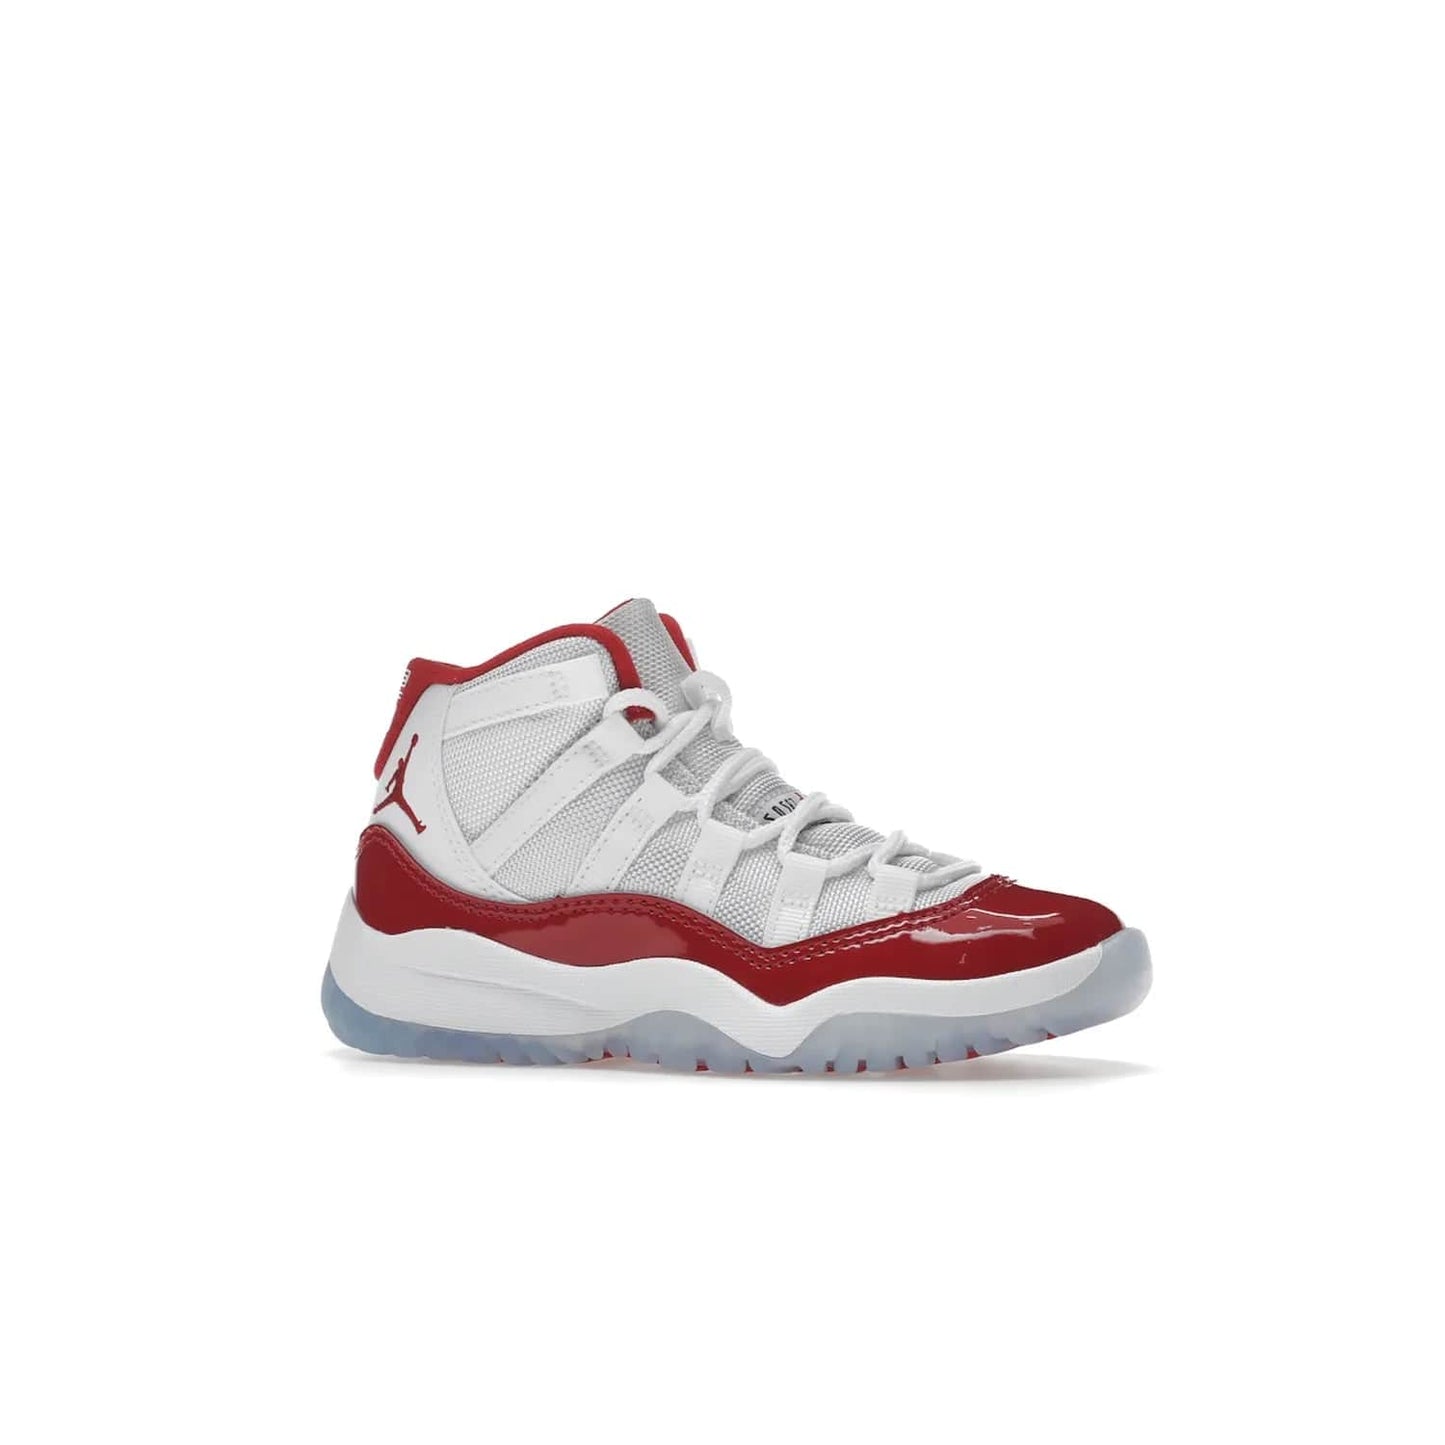 Jordan 11 Retro Cherry (2022) (PS) - Image 3 - Only at www.BallersClubKickz.com - An iconic silhouette with a timeless look, the Air Jordan 11 Retro Cherry 2022 PS features a crisp White, Varsity Red and Black colorway. The upper is made of ballistic mesh, a red patent leather mudguard, '23' branding and white Phylon midsole. Get optimal cushioning and comfort on December 10th, 2022. Don't miss out.